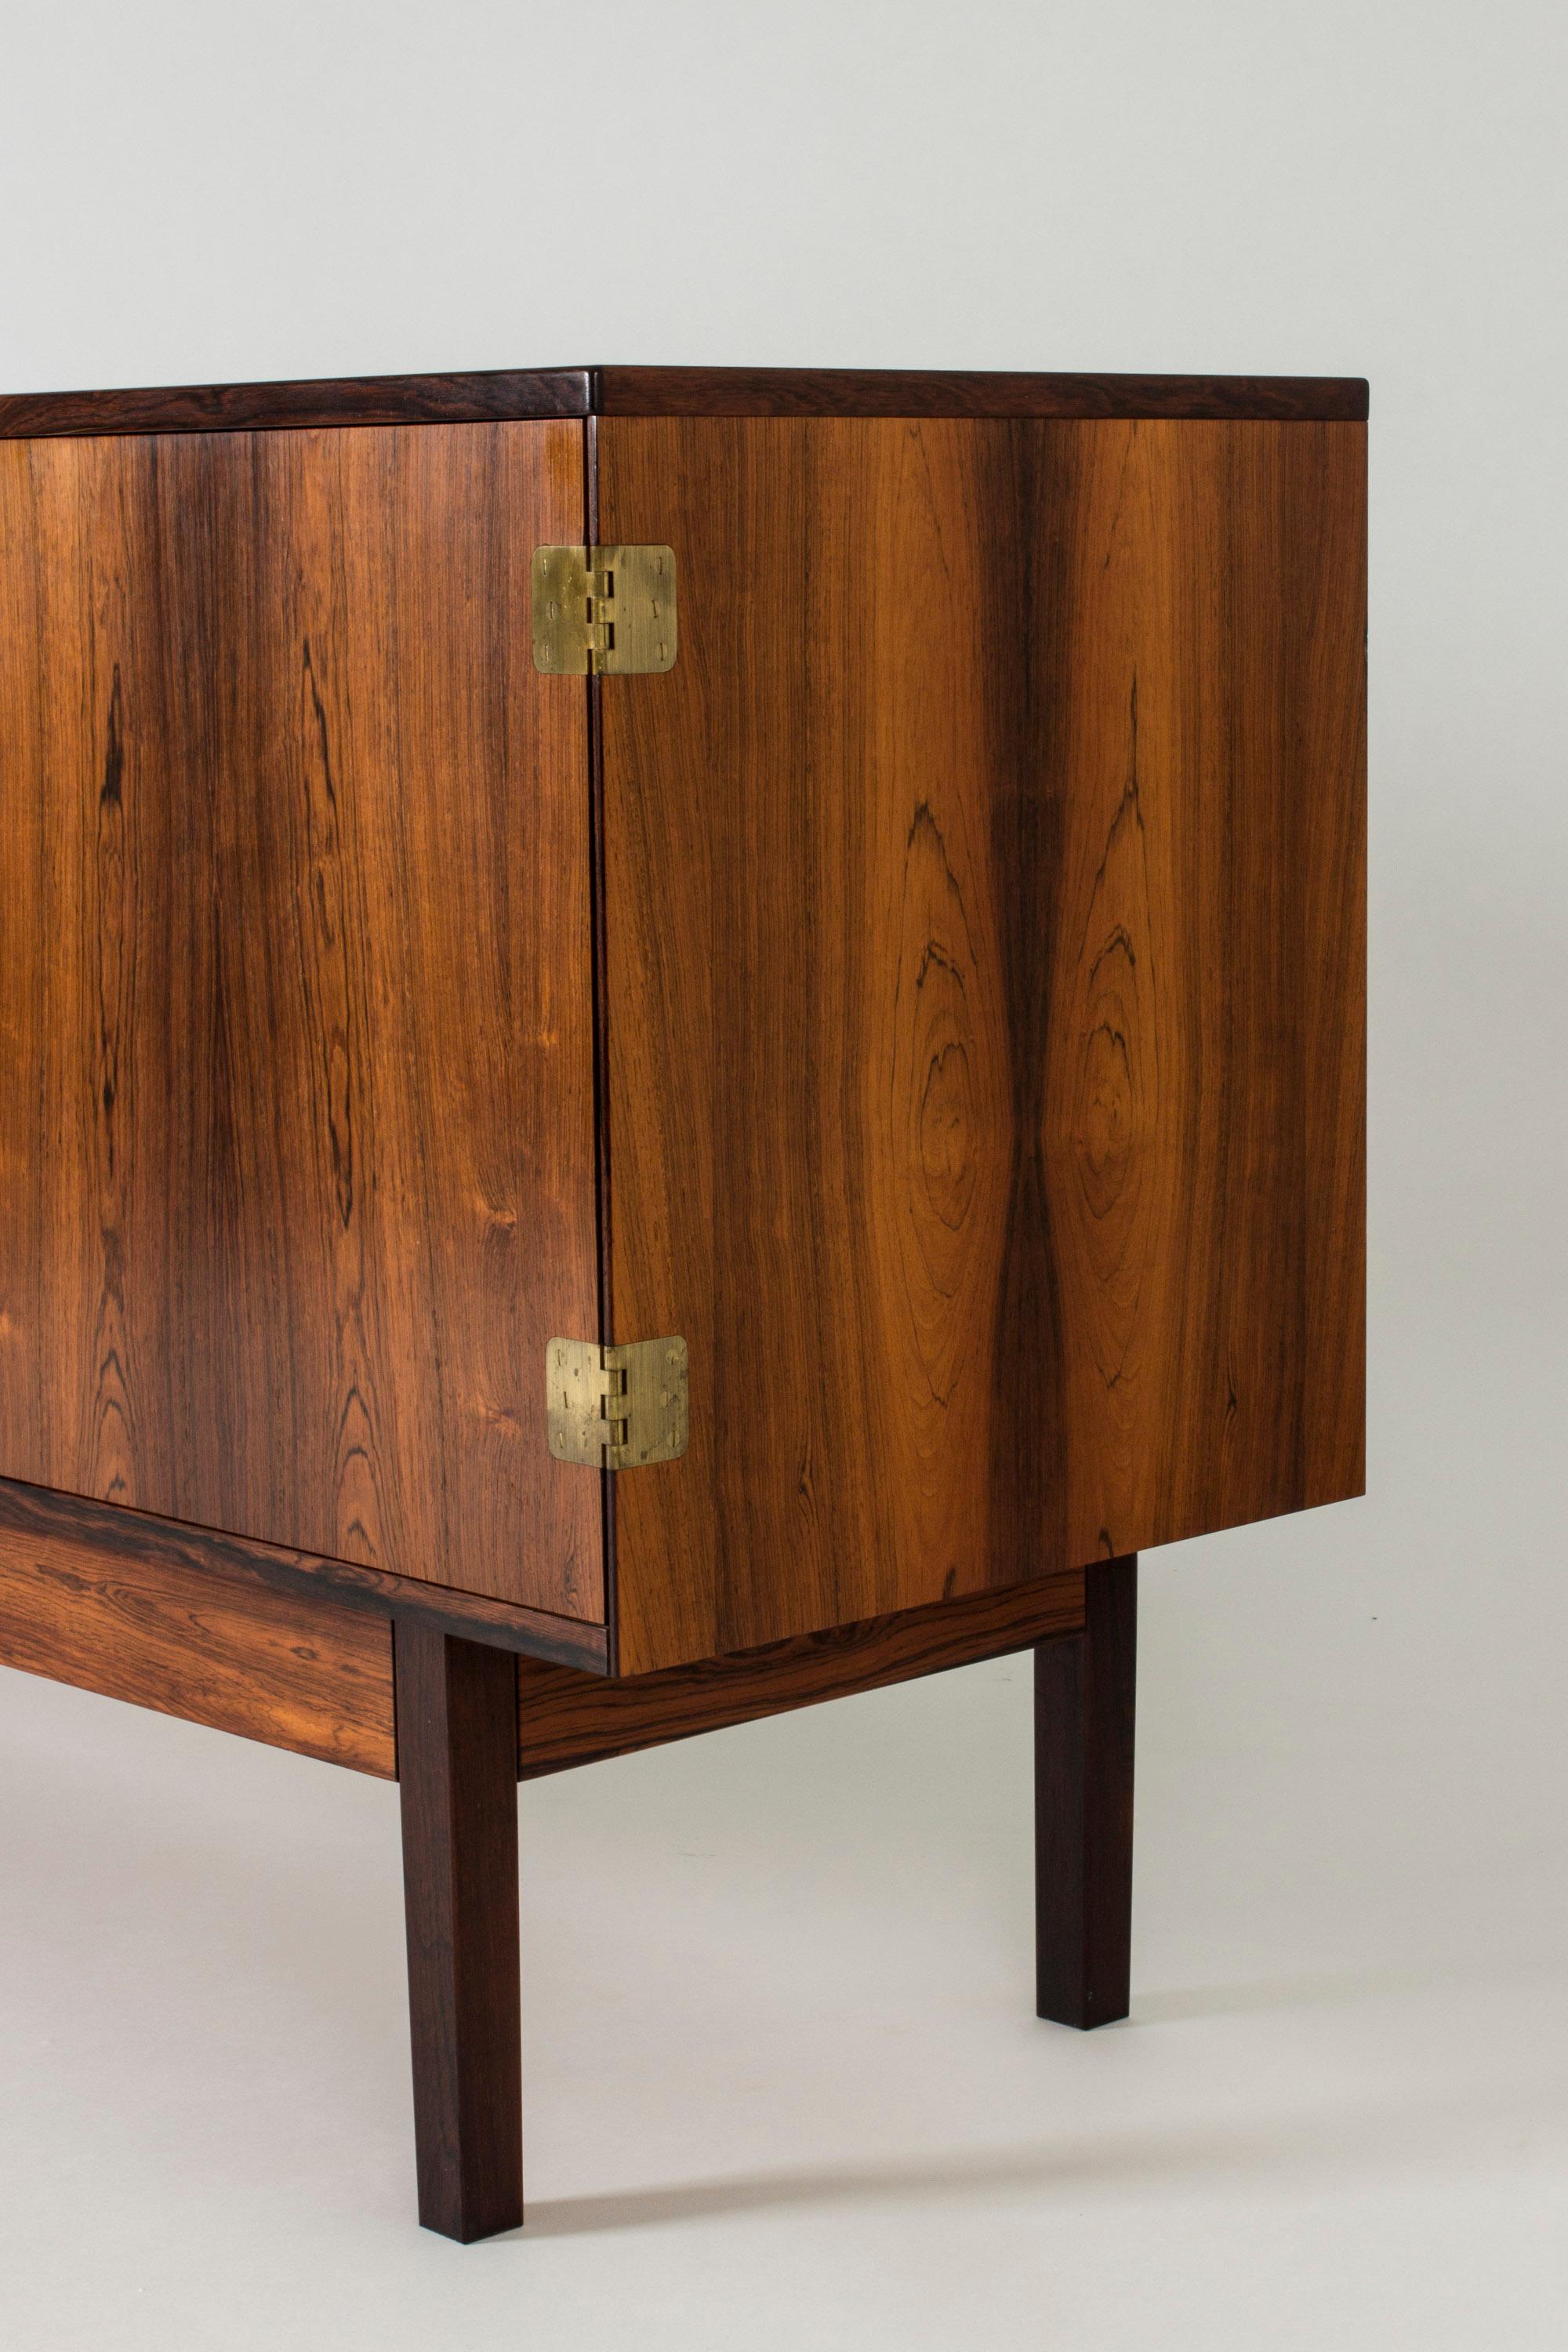 Mid-20th Century Danish Midcentury Rosewood and Brass Sideboard by Svend Langkilde, 1960s For Sale